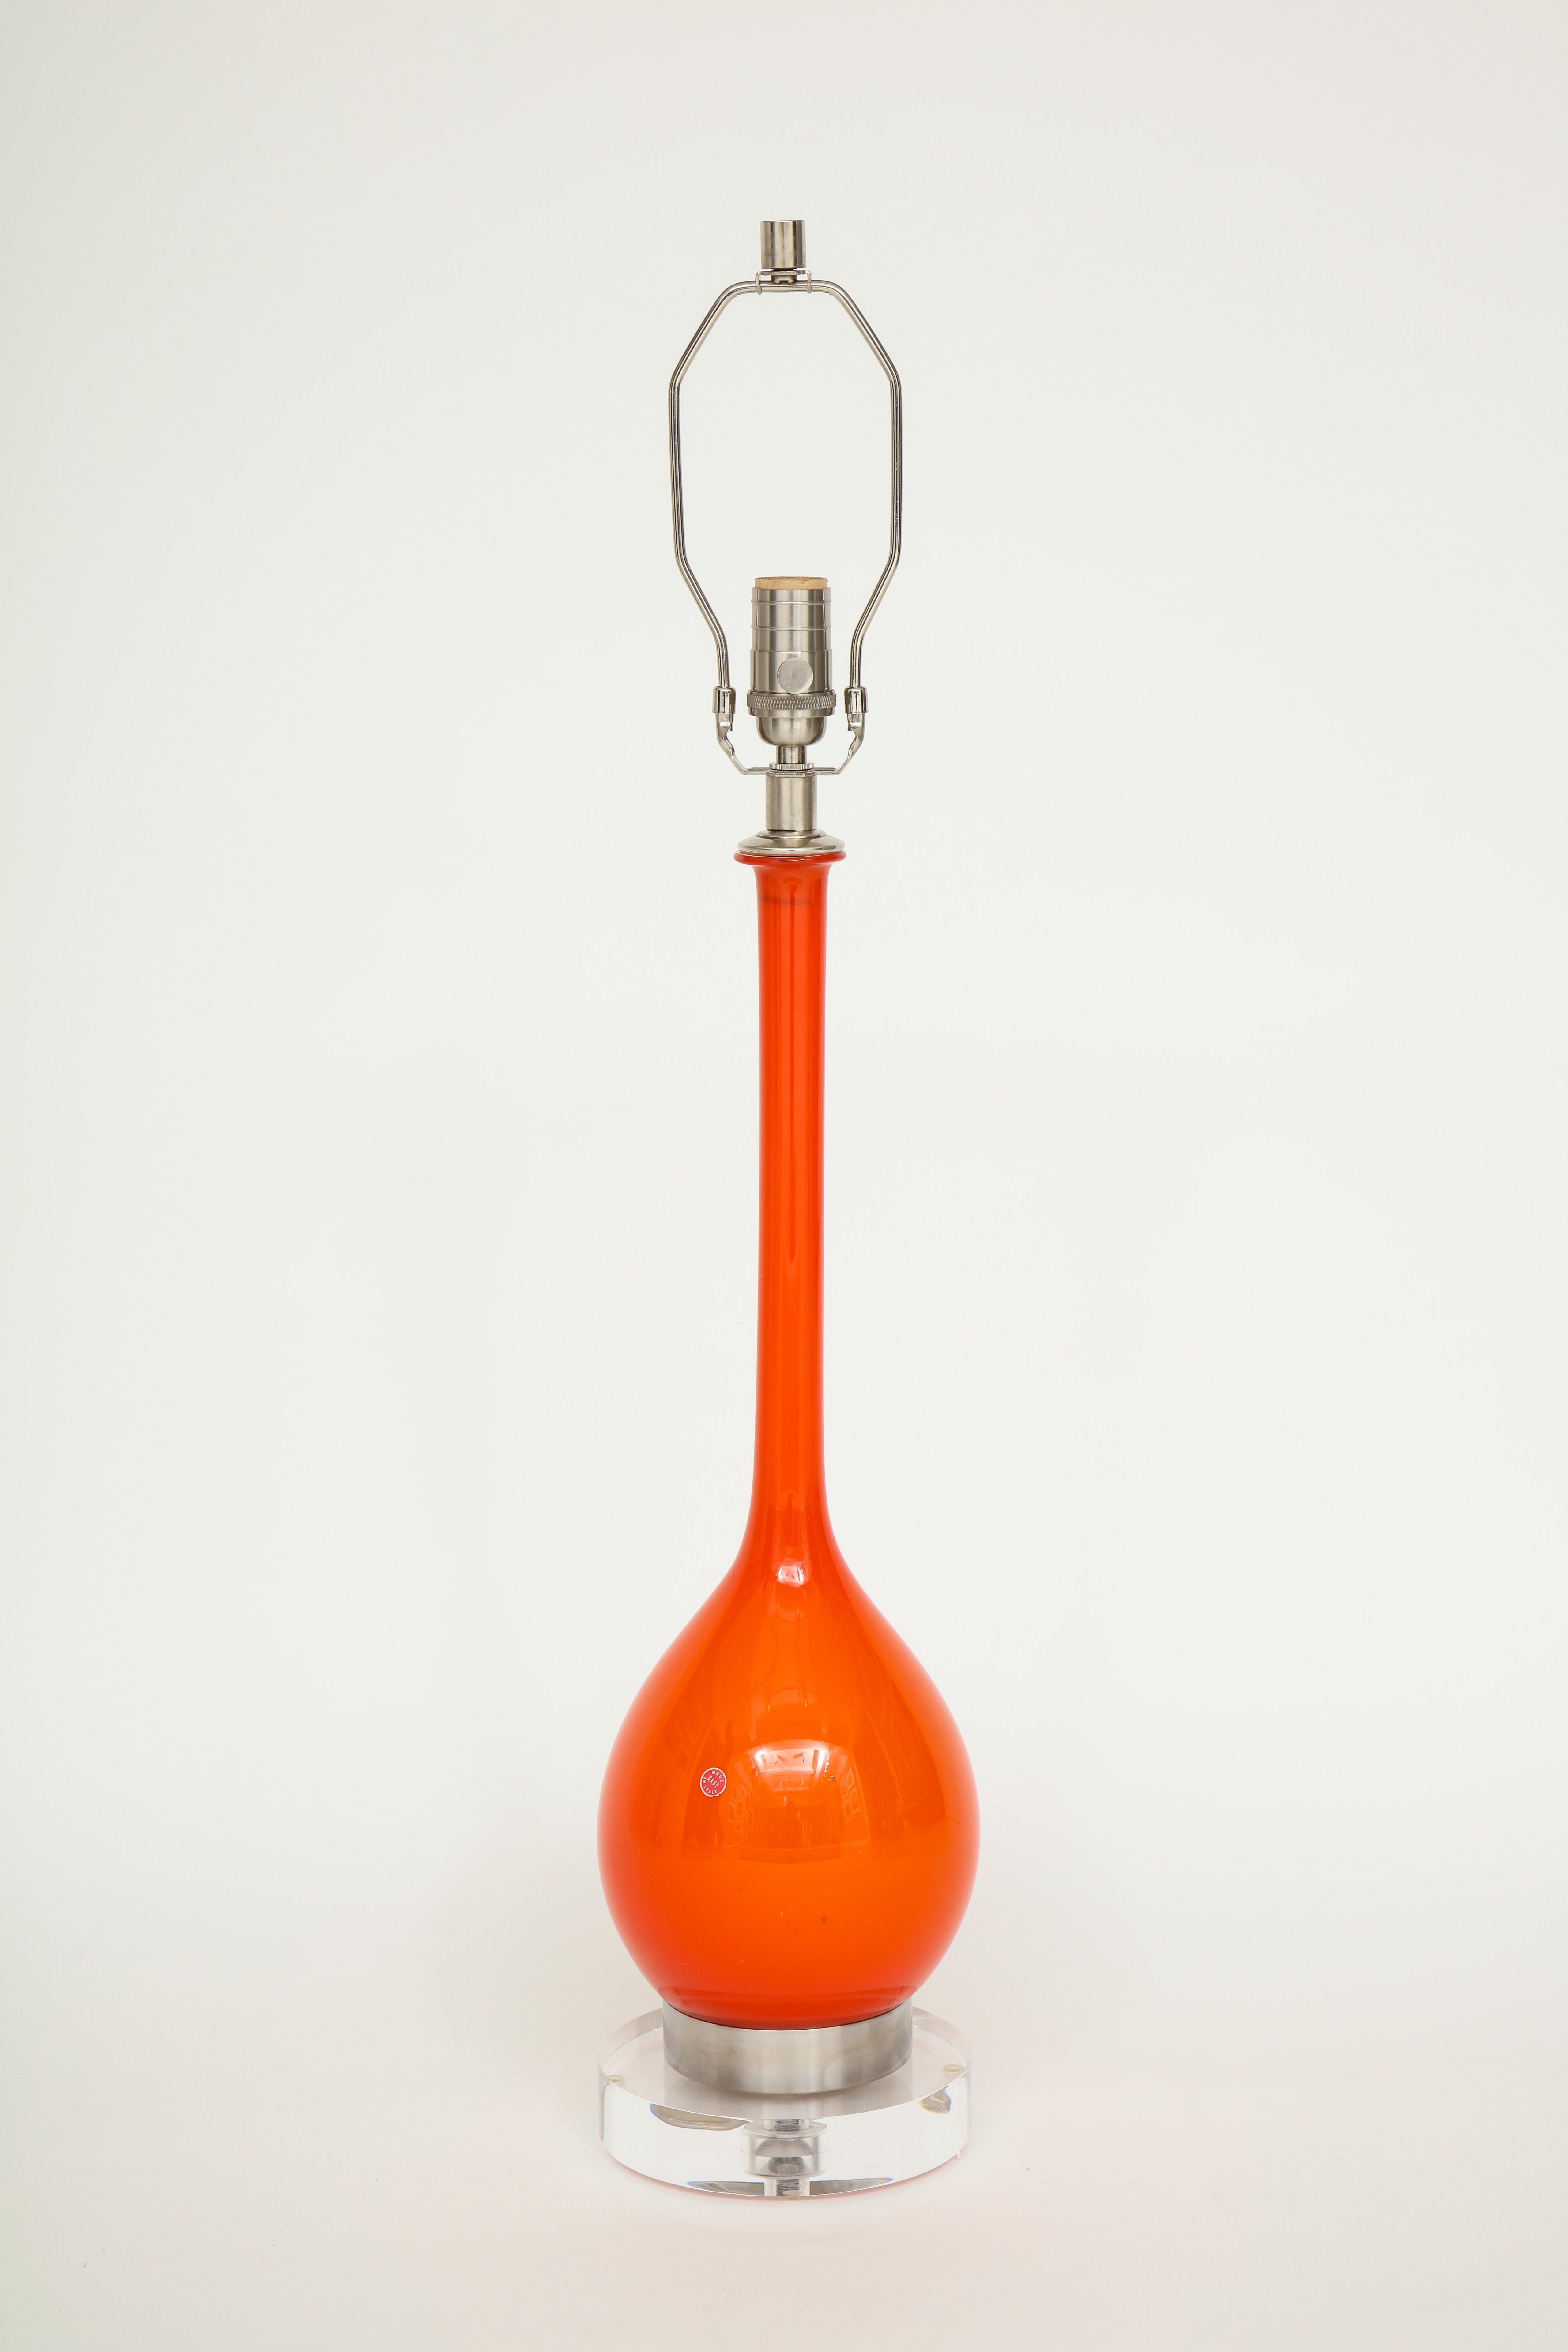 Vibrant orange Murano glass lamps with elongated necks and orb bodies mounted on nickel bands and lucite bases. Rewired for use in the USA. 100 W bulb max. Base and glass body measures 23.25 inches.